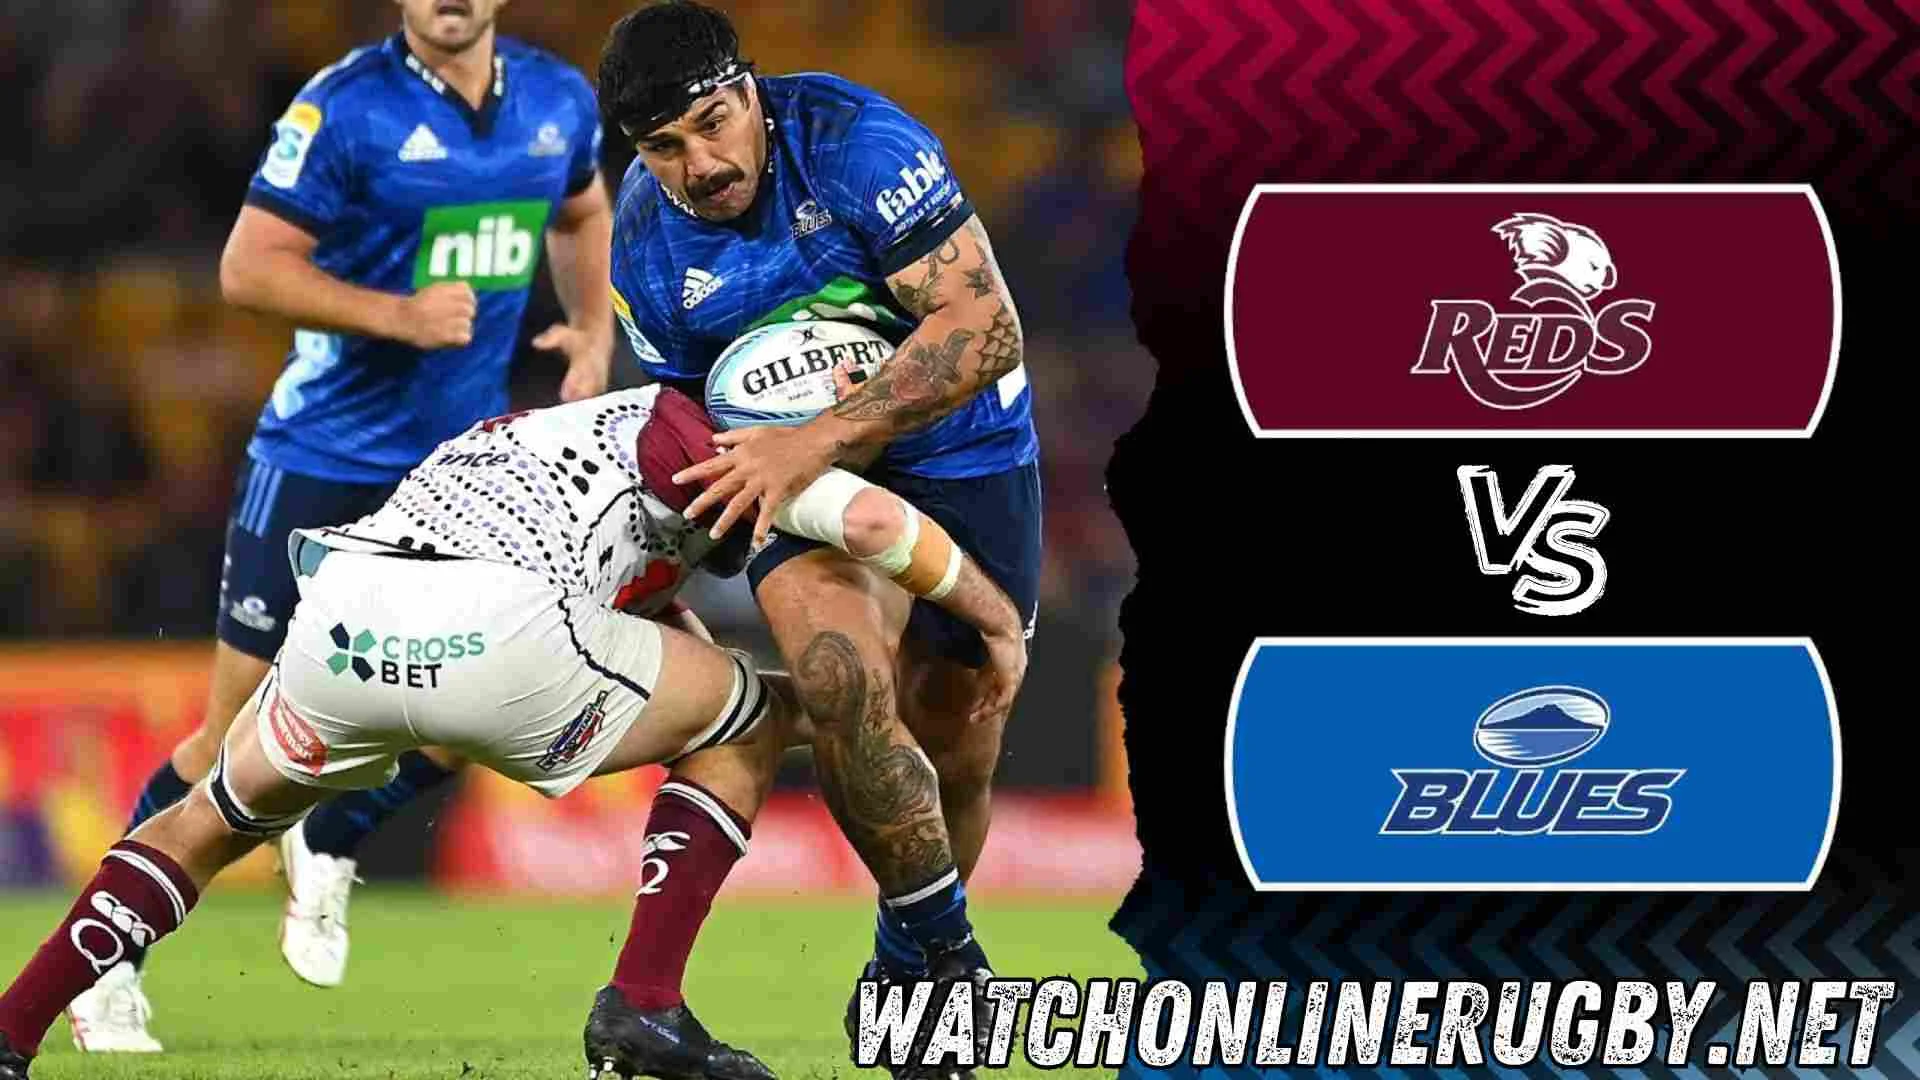 Blues VS Reds Rugby Stream Live